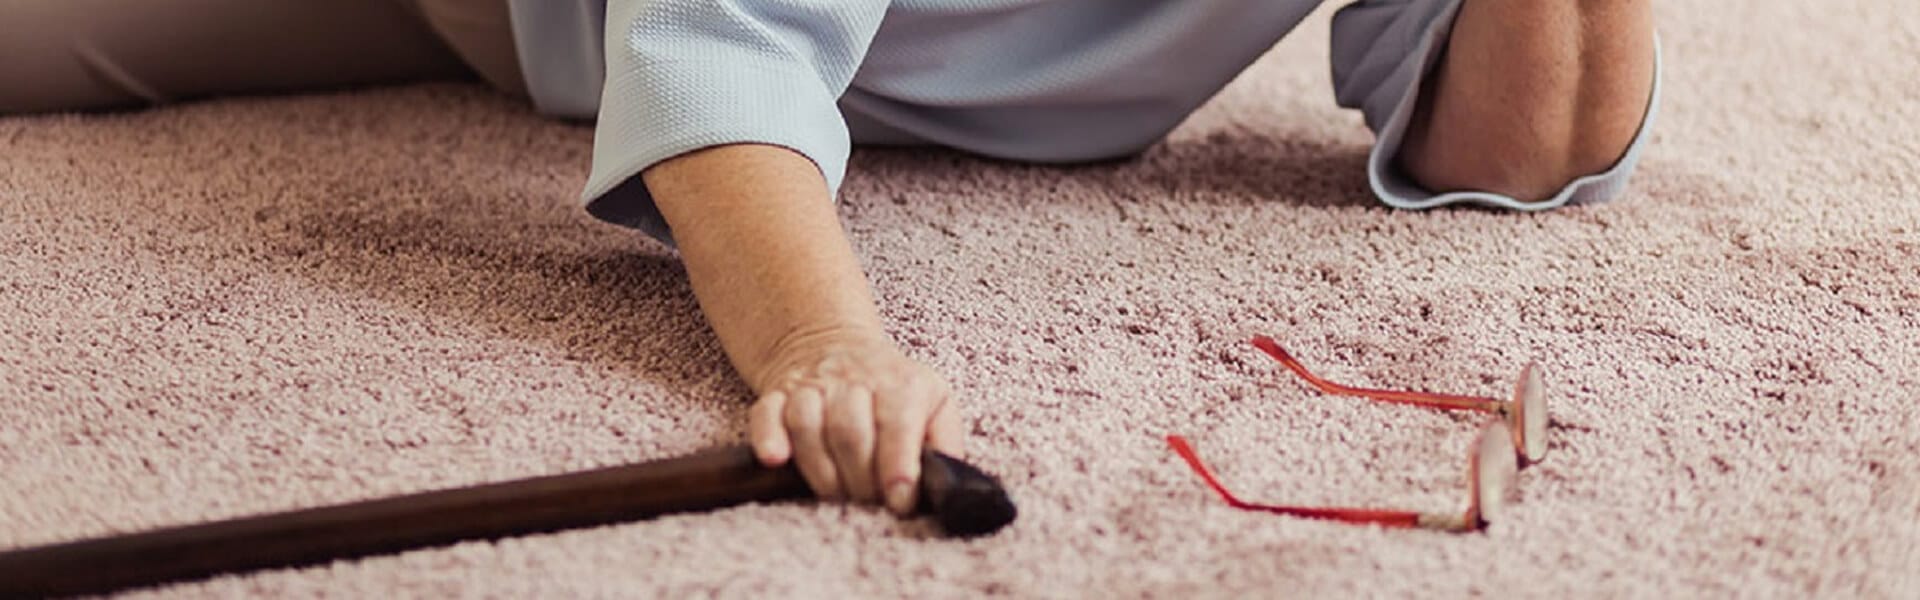 older person laying on carpet following a fallion